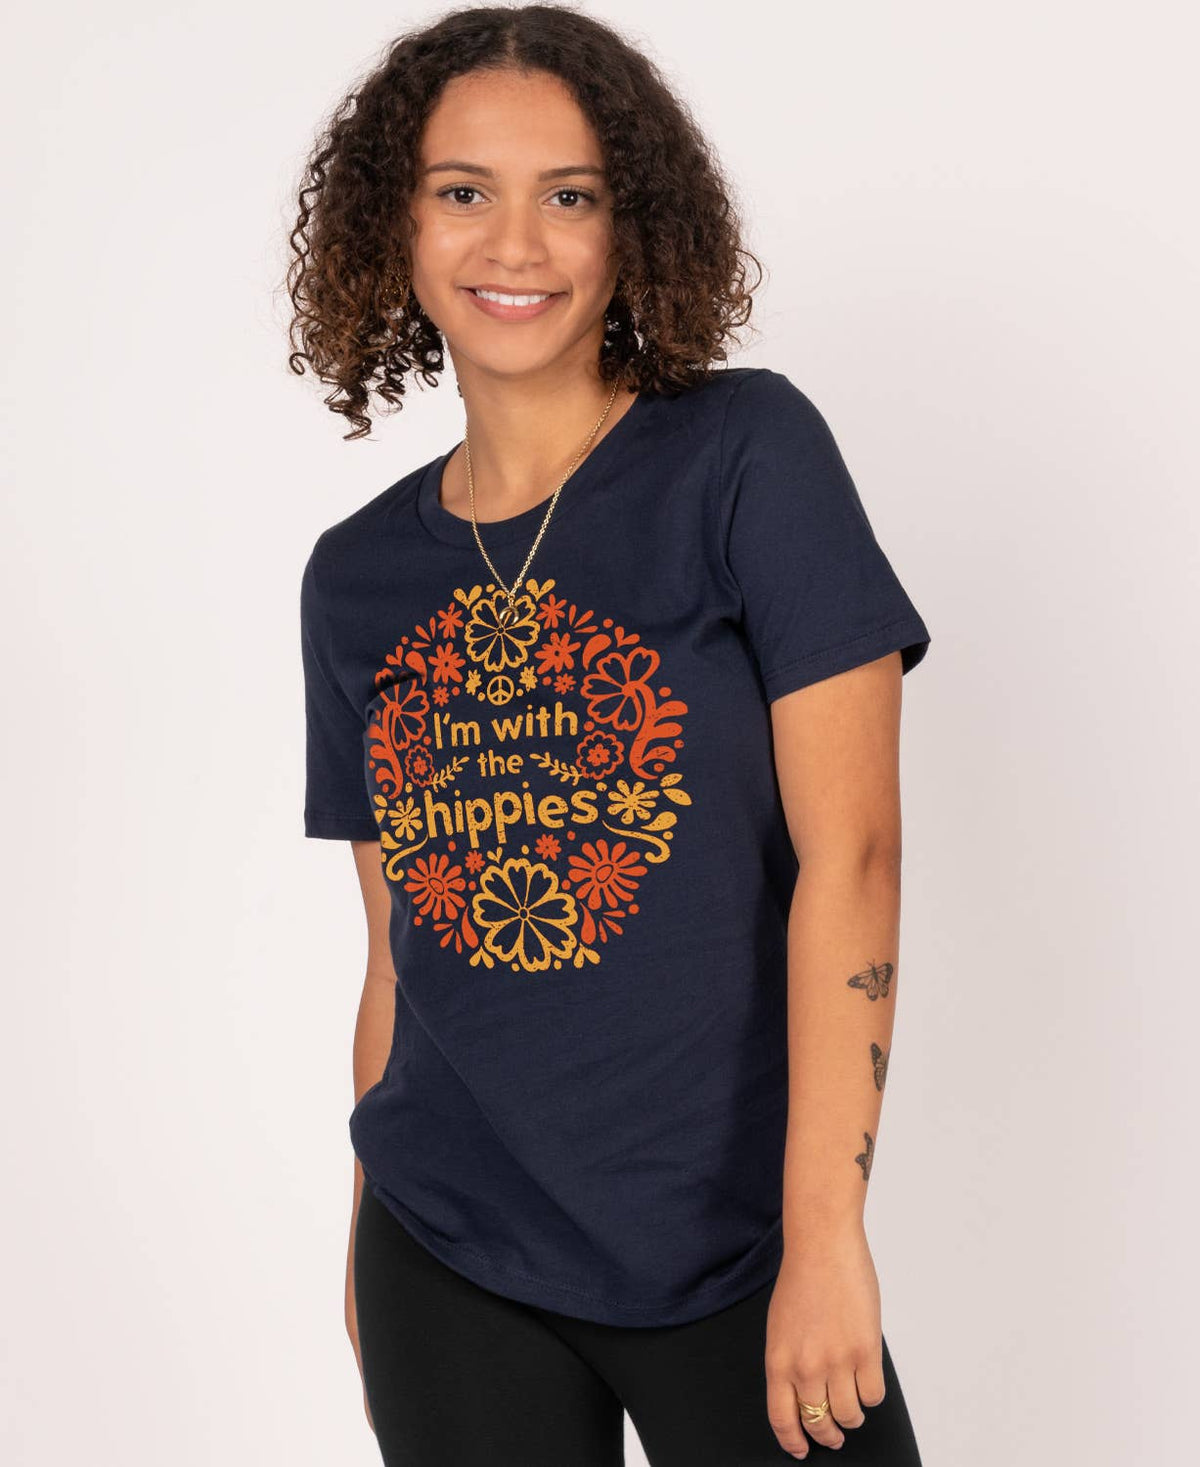 Terrapin Moon Apparel - Ladies Clothing Shop - I’m with the Hippies Tee